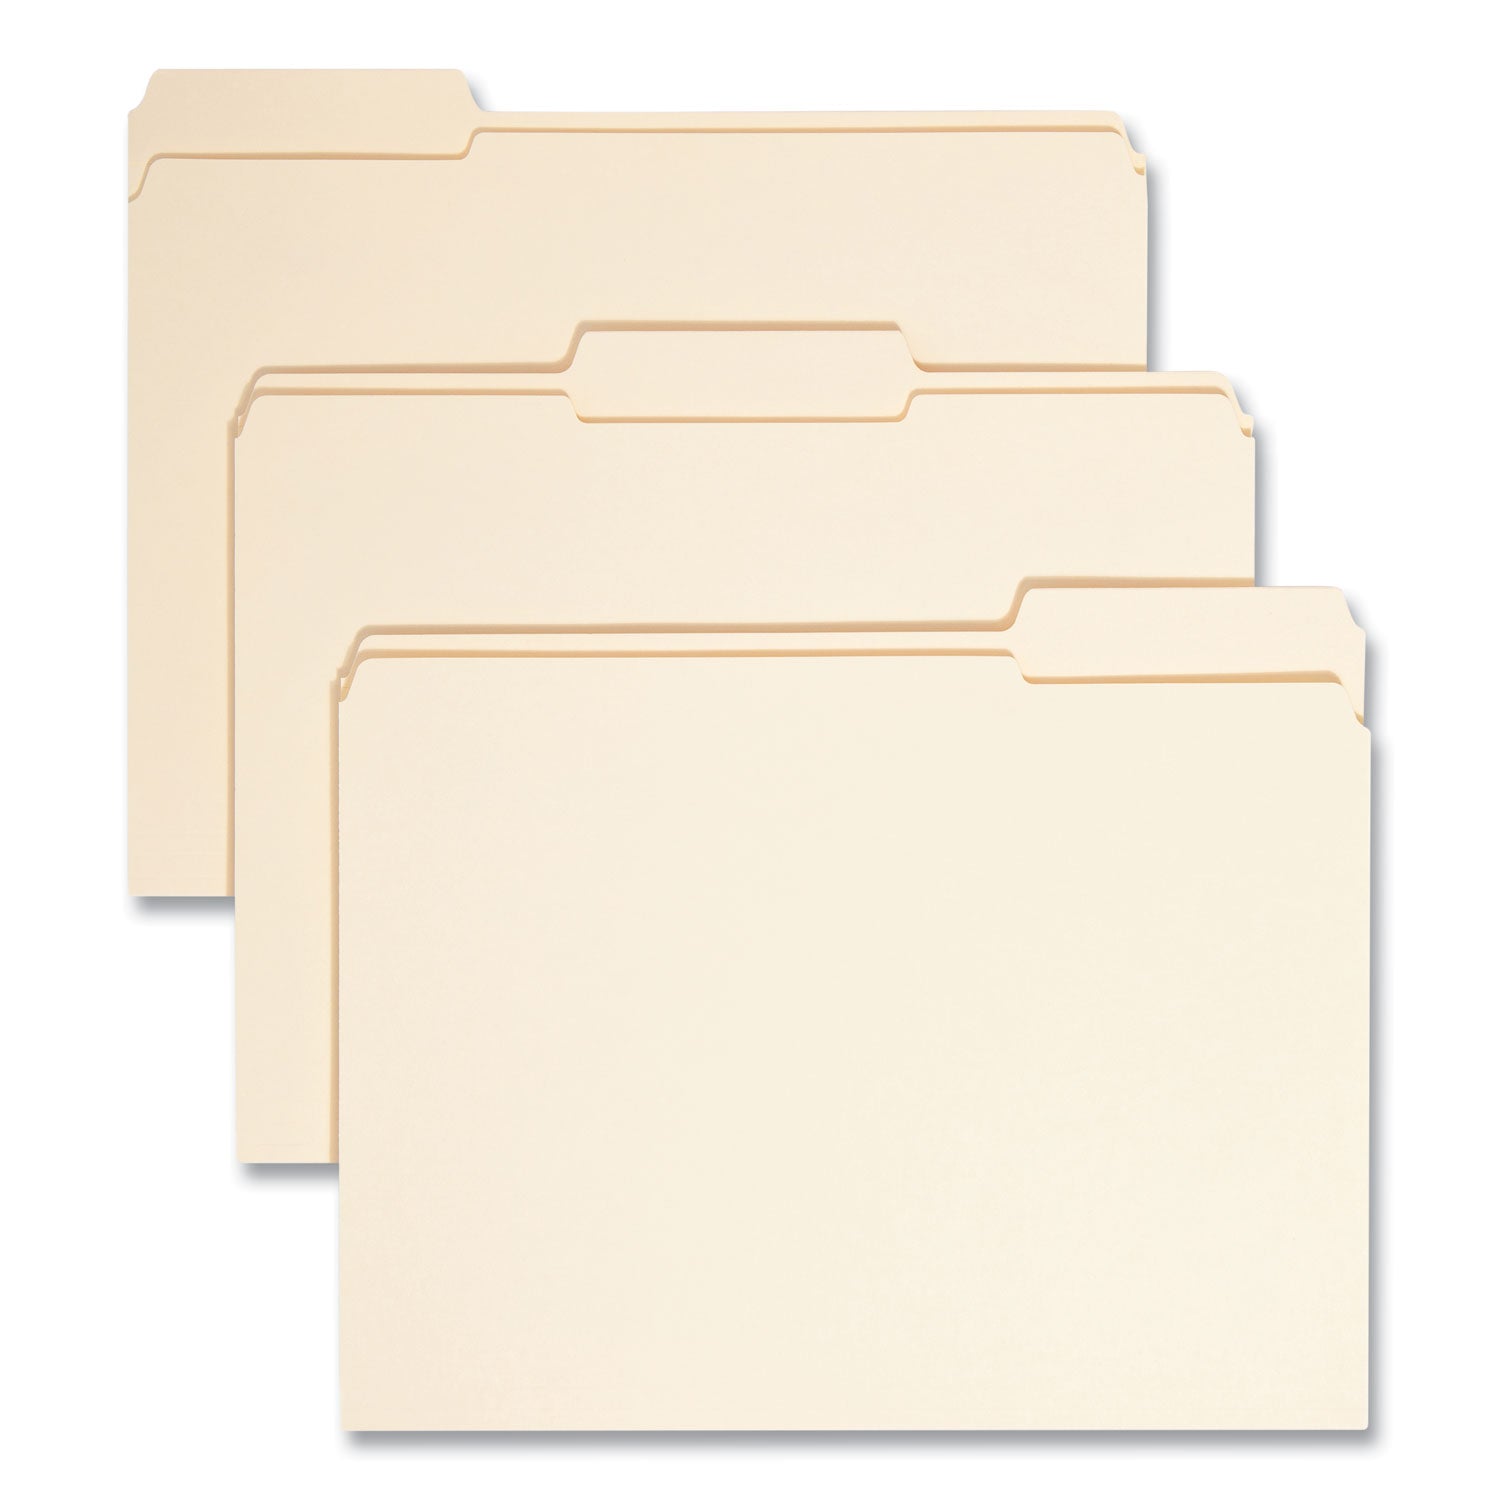 Reinforced Tab Manila File Folders, 1/3-Cut Tabs: Assorted, Letter Size, 0.75" Expansion, 11-pt Manila, 100/Box - 